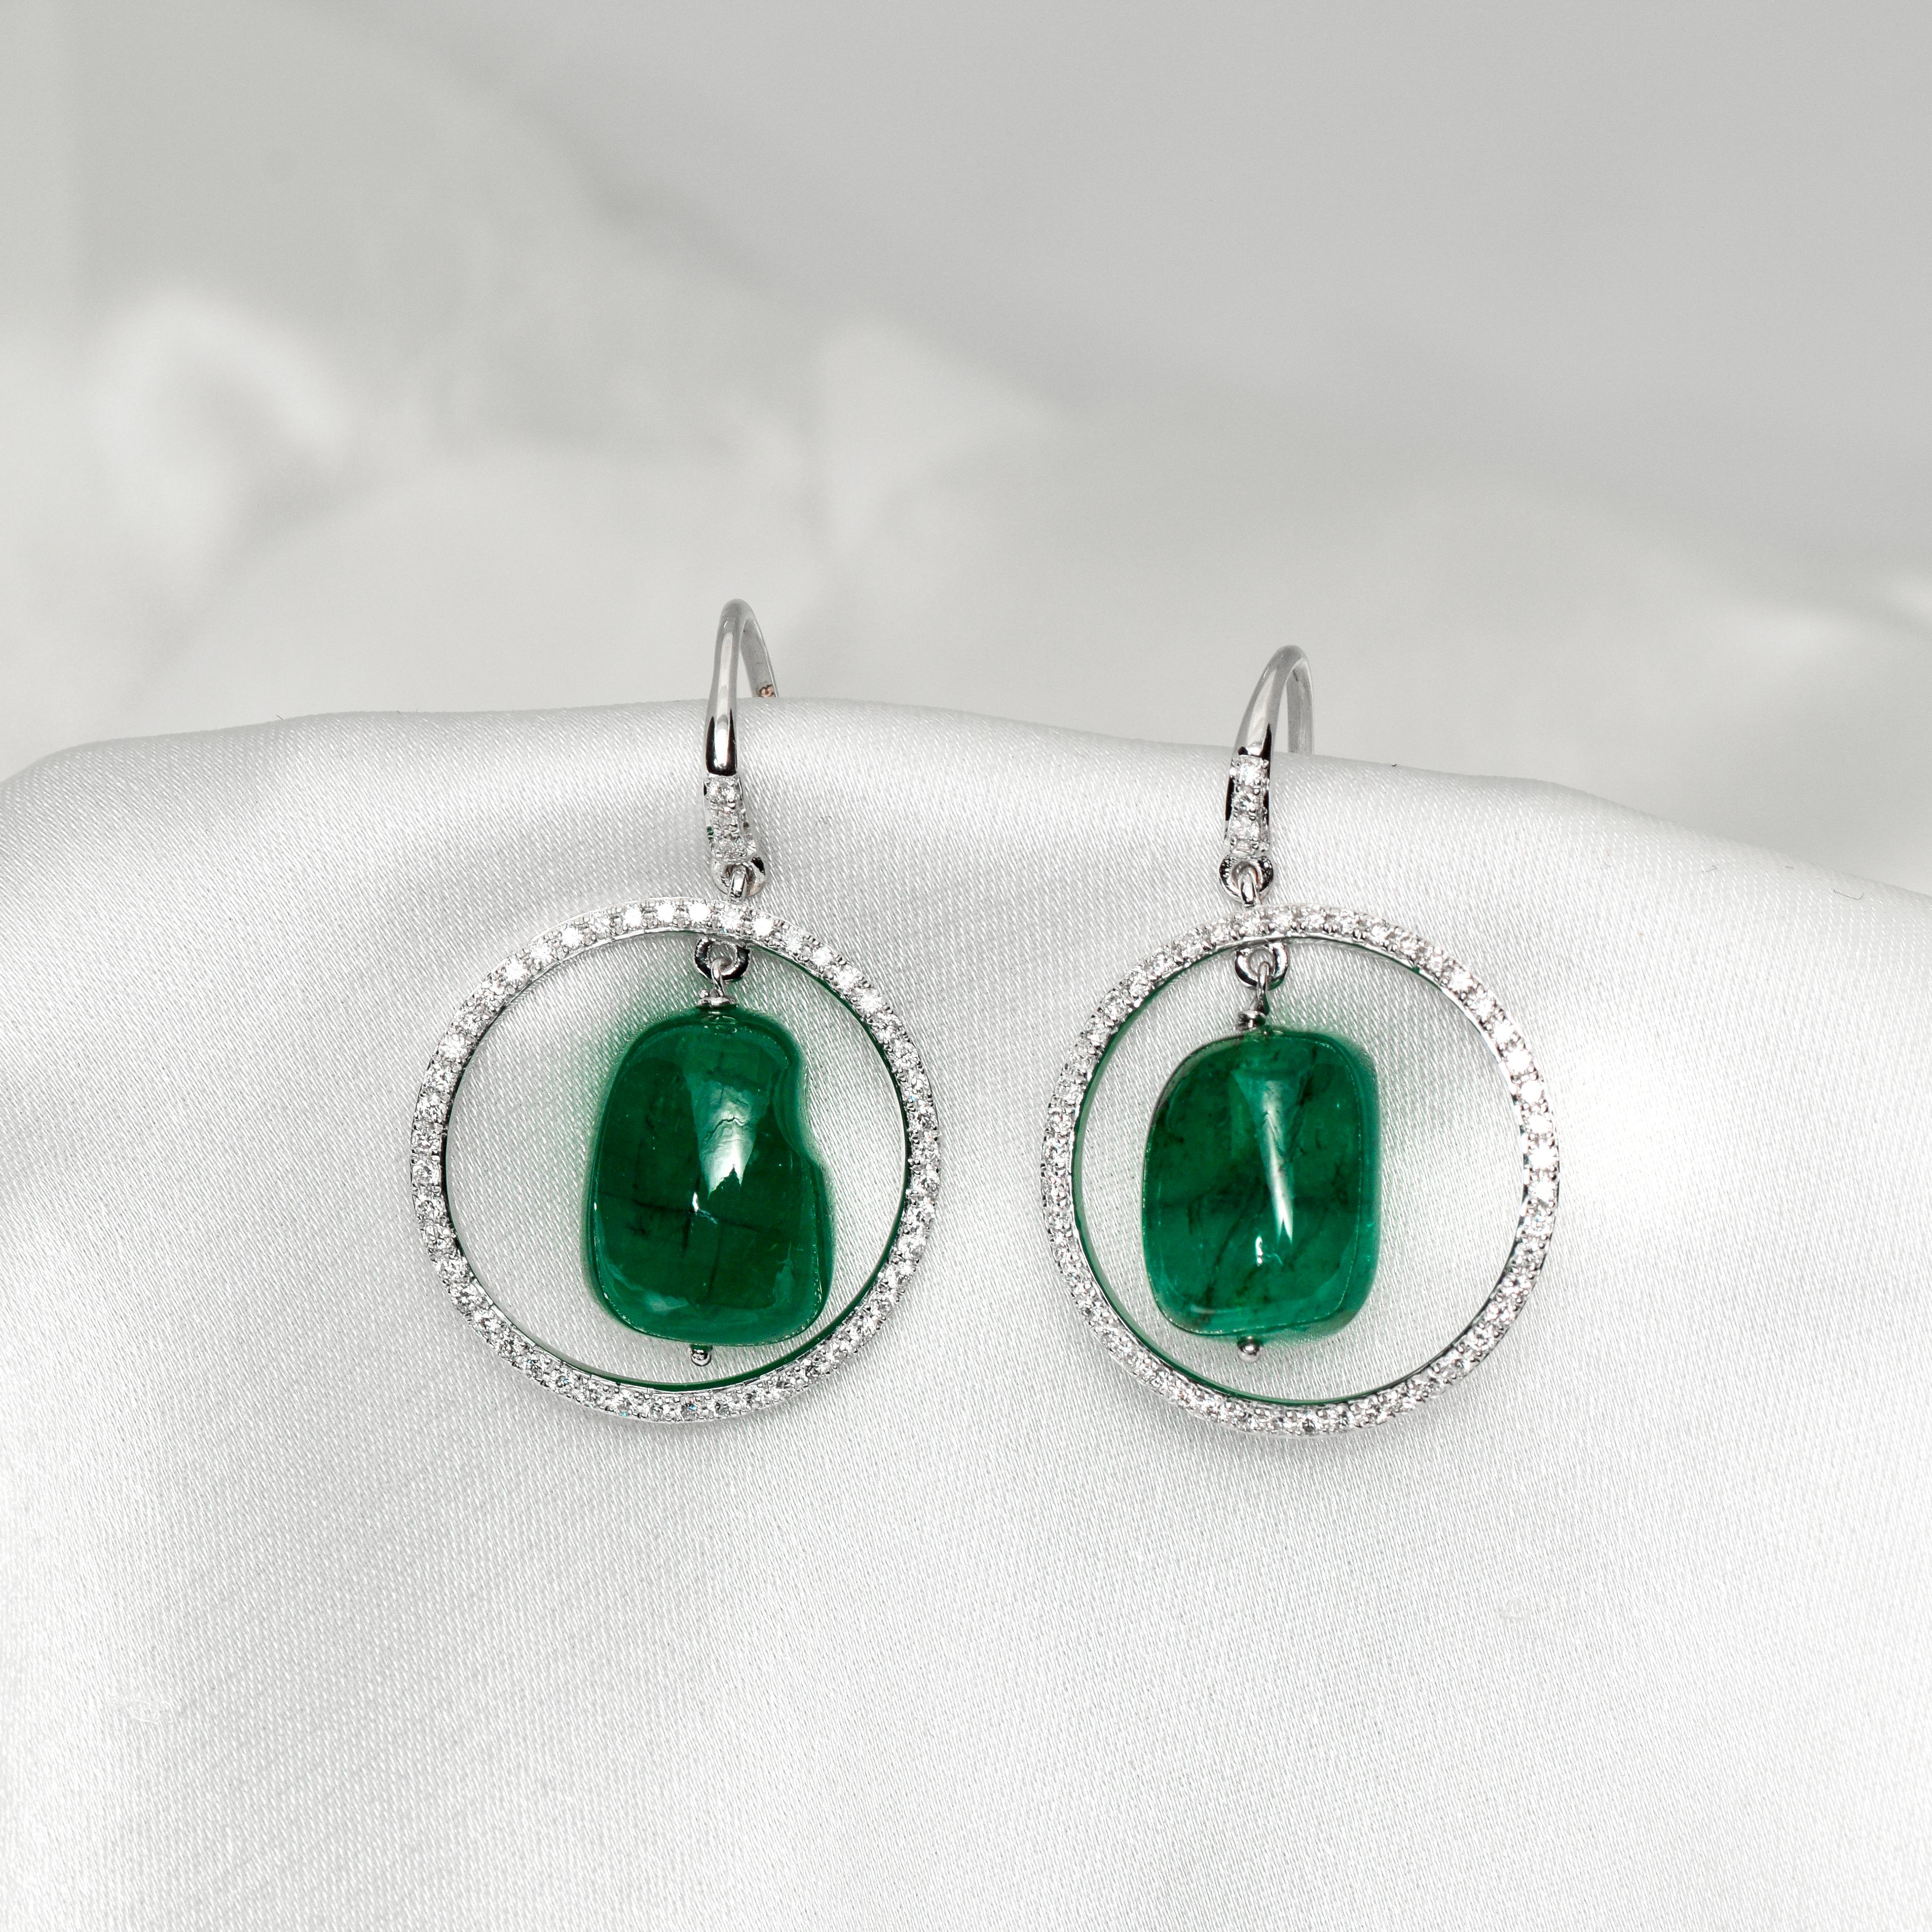 **One IGI 14K White Gold 19.56 Ct Emerald&Diamonds Antique Art Deco Style Hook Earrings **

Pairs of IGI-Certified natural green Emerald as the center stone weighing 19.56 ct surrounded with the FG VS accent diamonds weighing 0.73 ct on the 14K